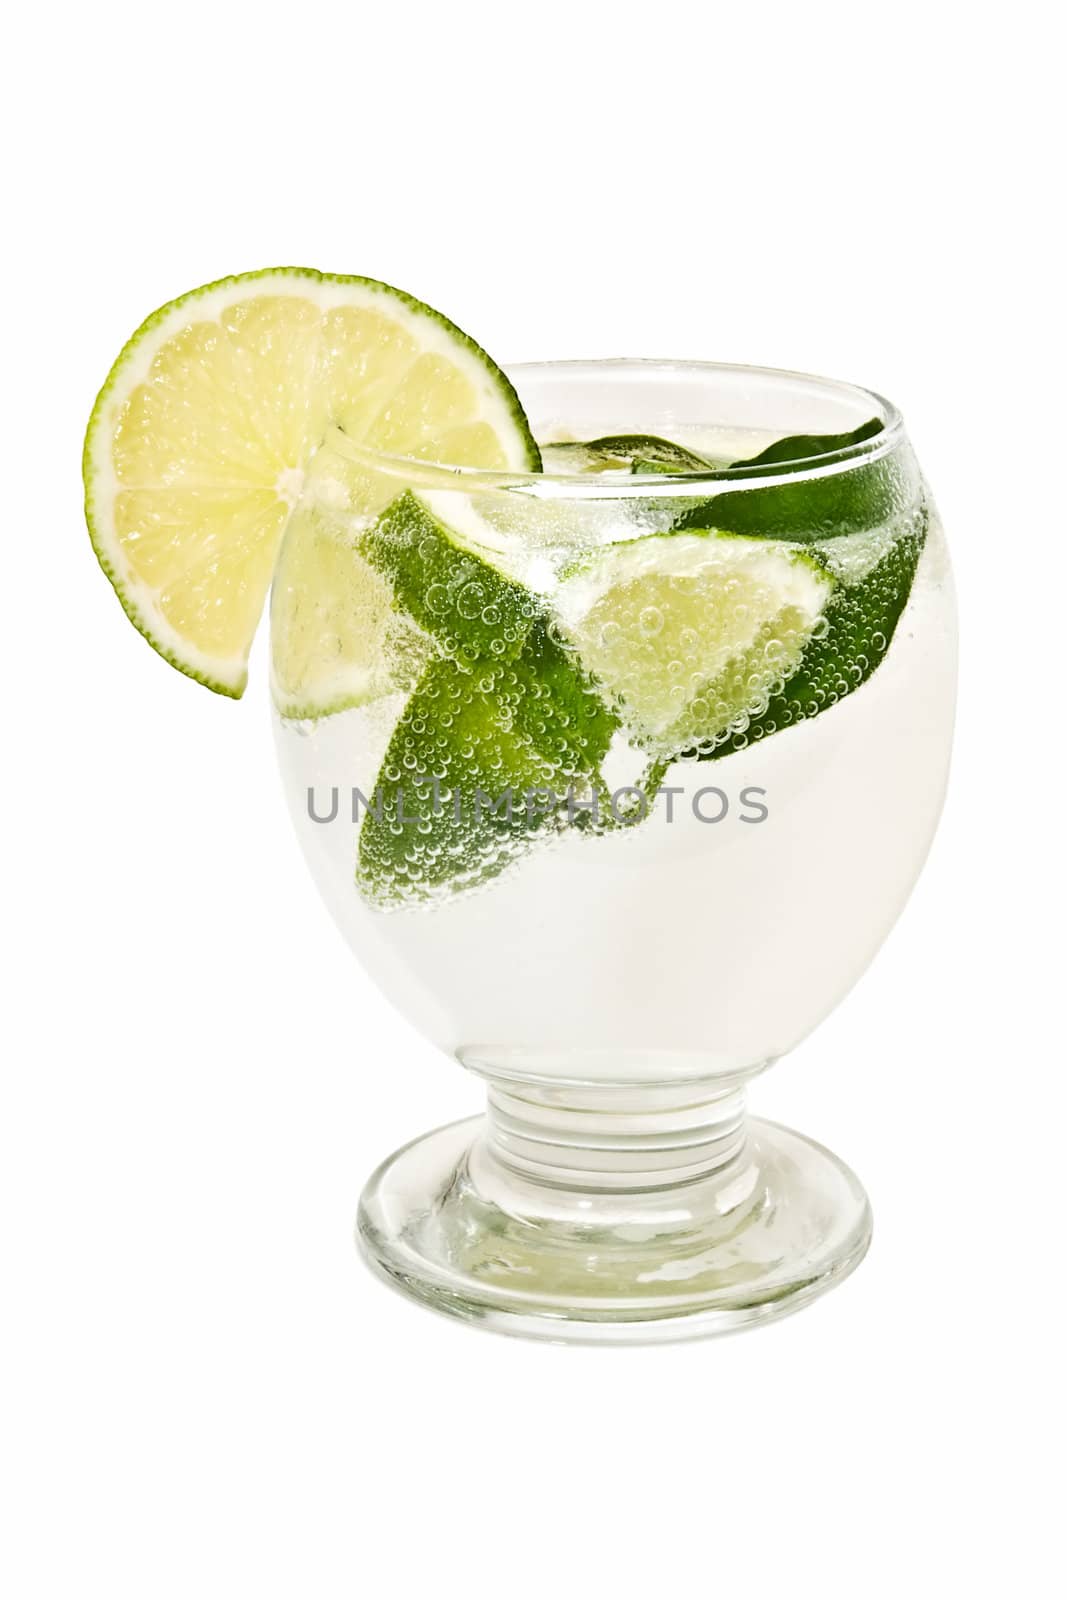 tropical cocktail on the white background
